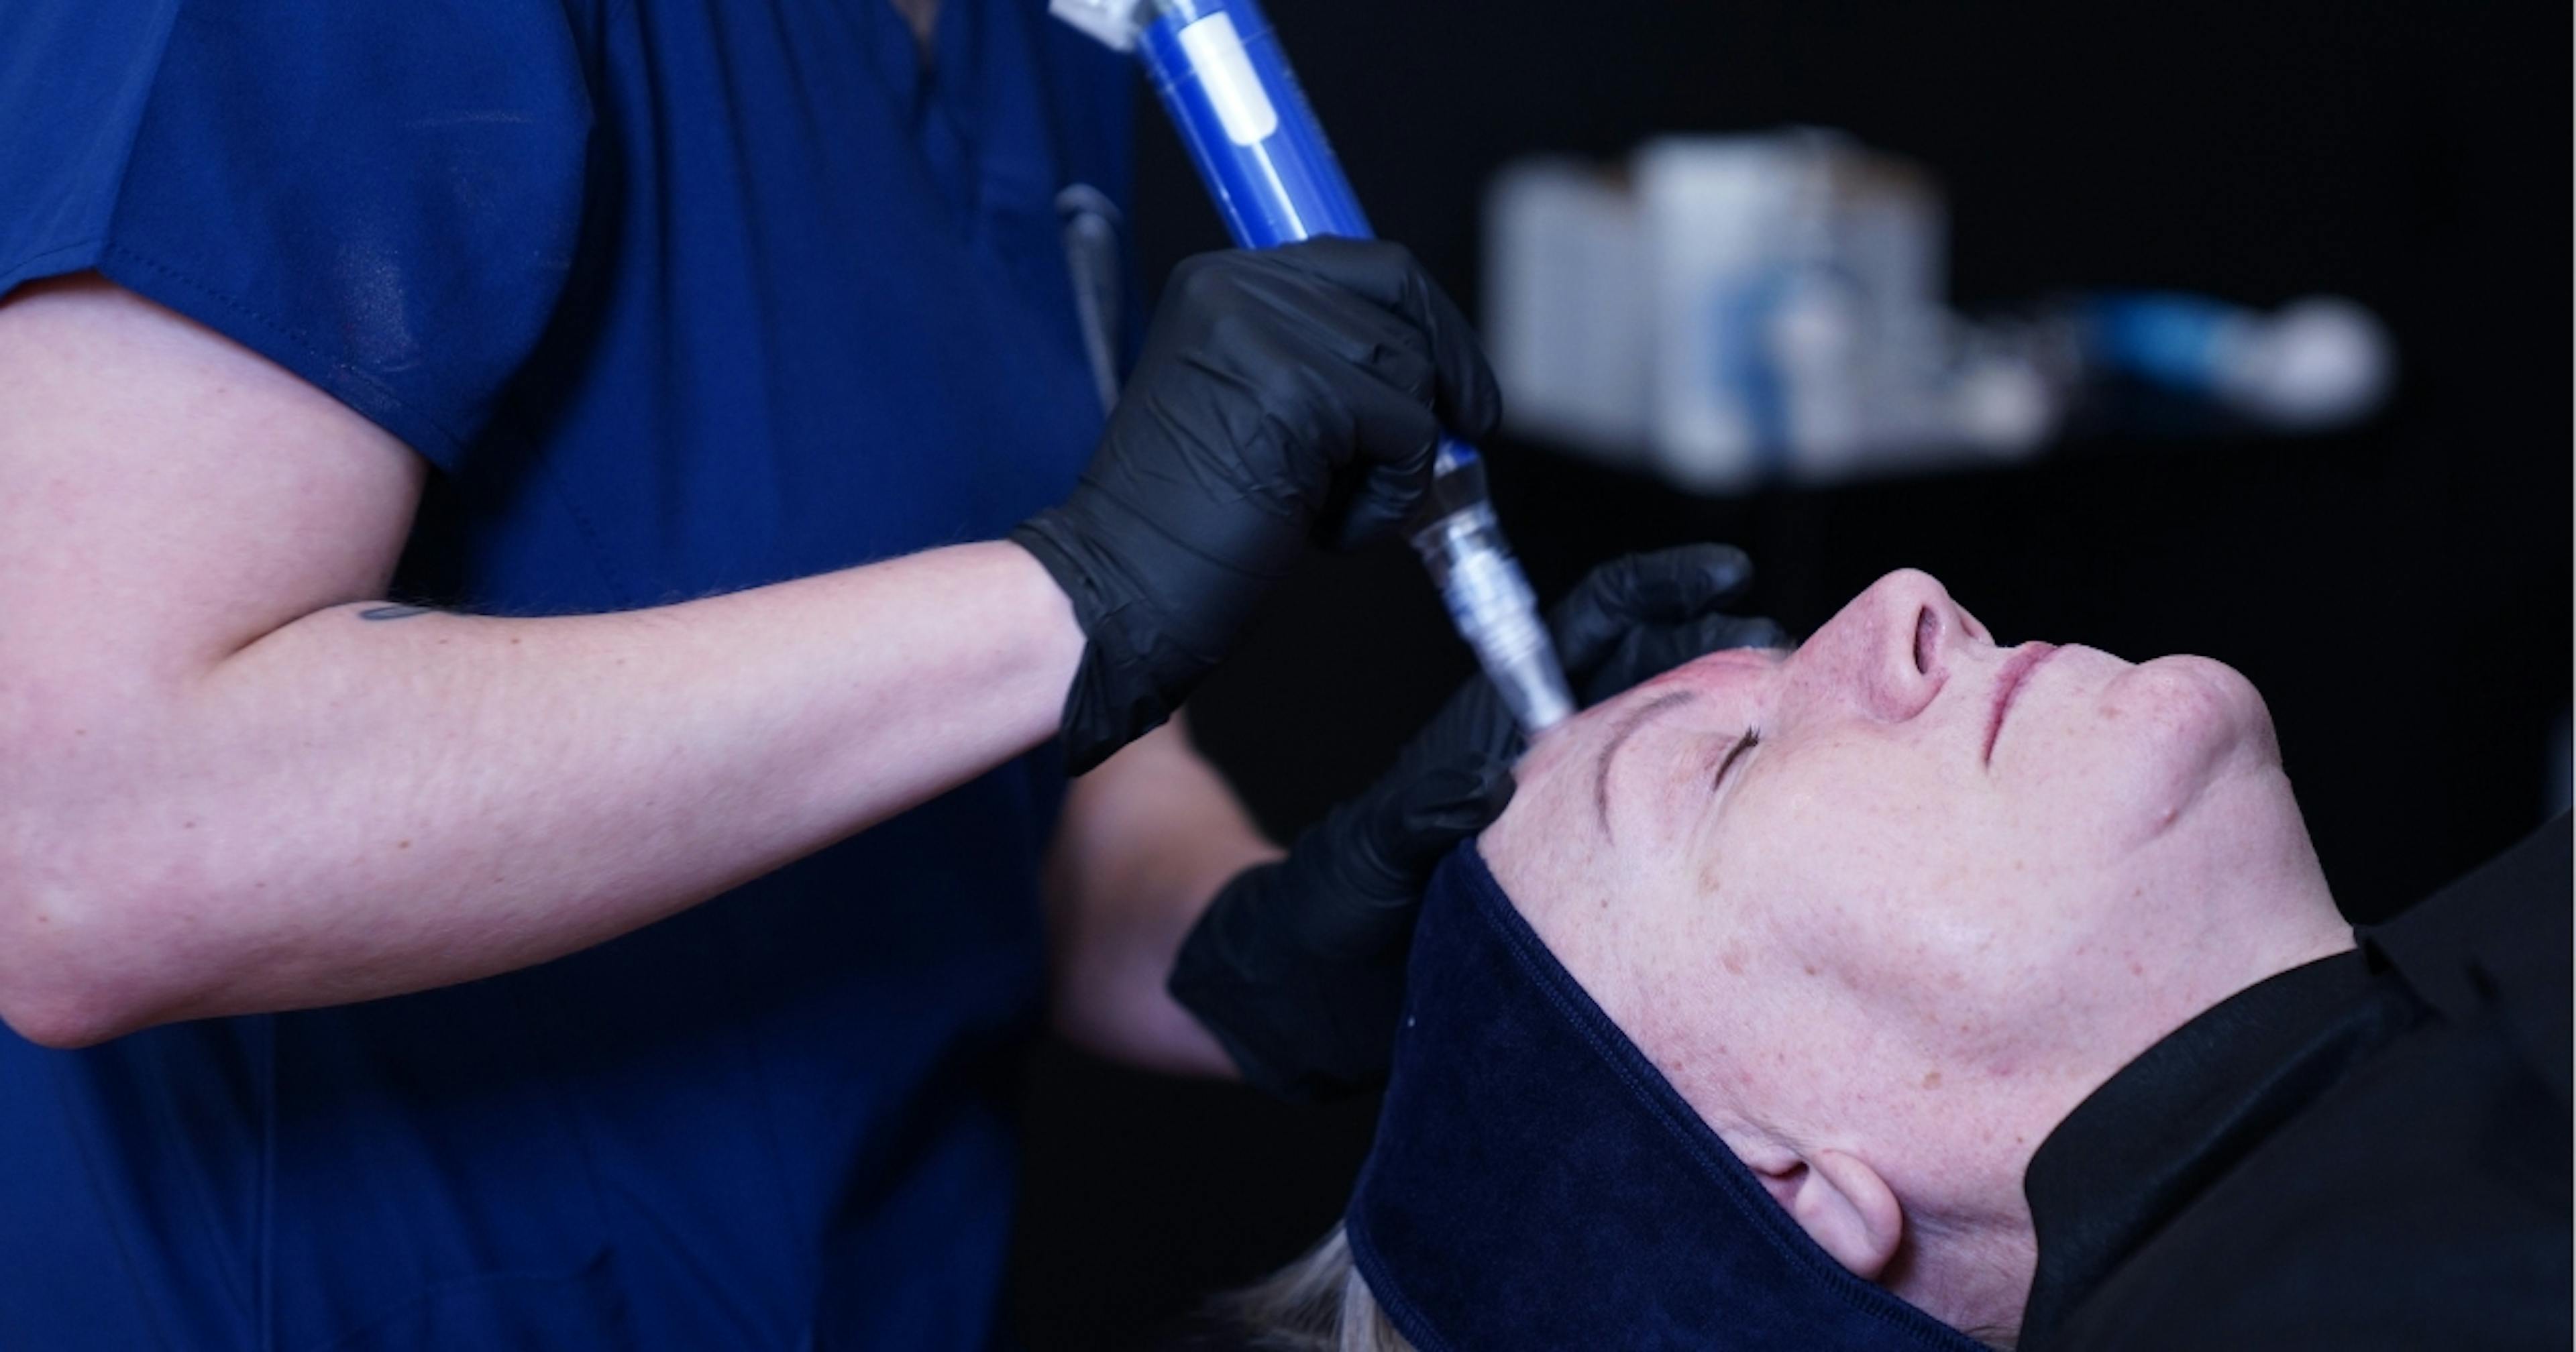 Microneedling course at Harley Academy London